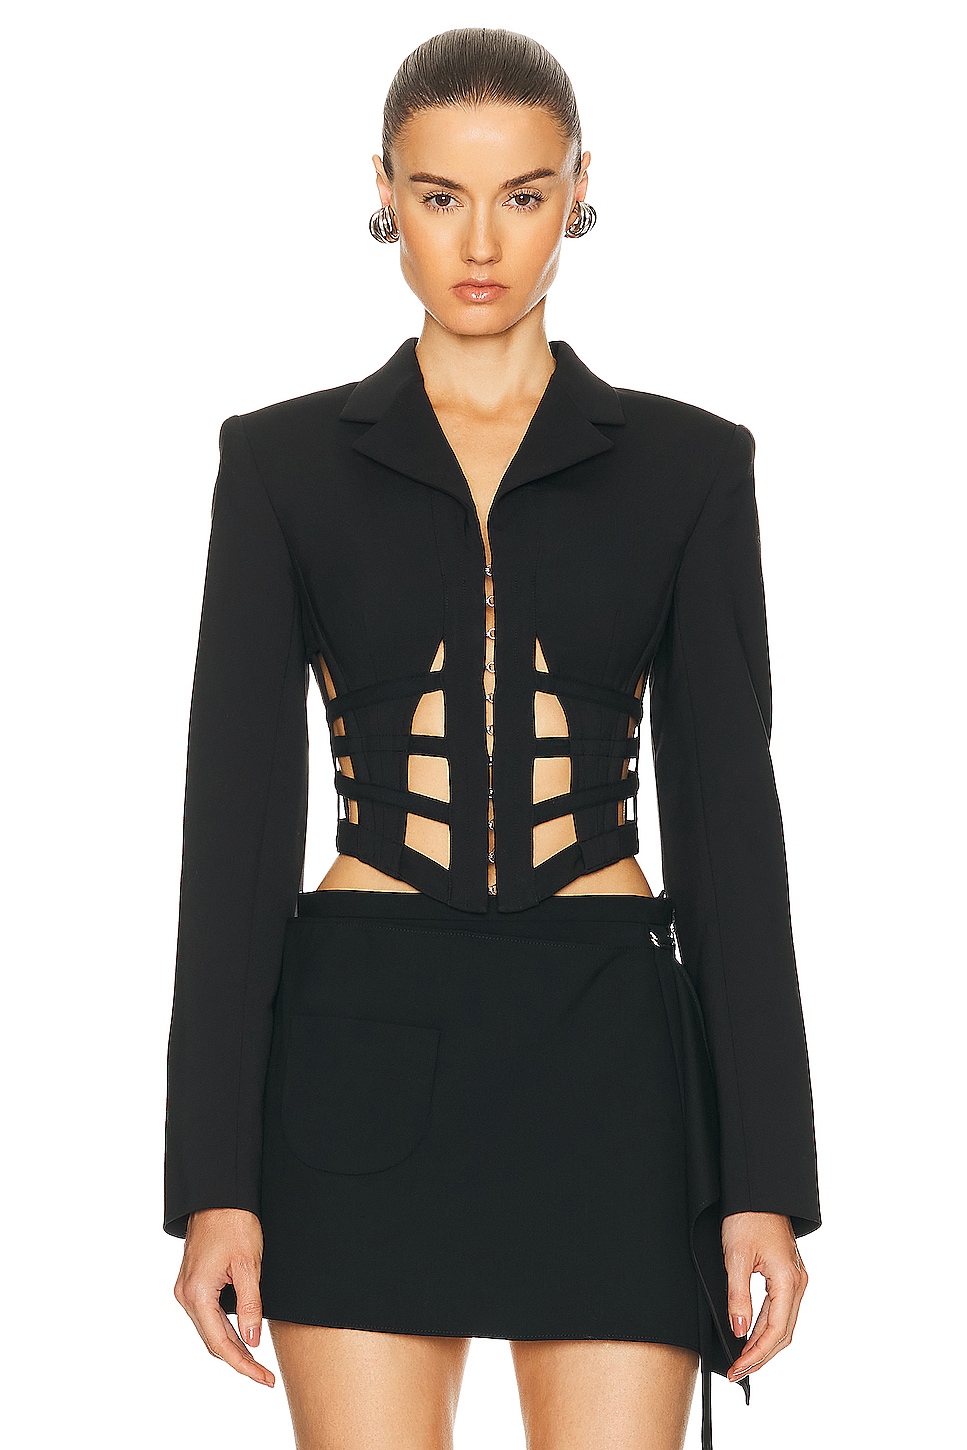 Image 1 of Dion Lee Cage Corset Blazer Top in Black